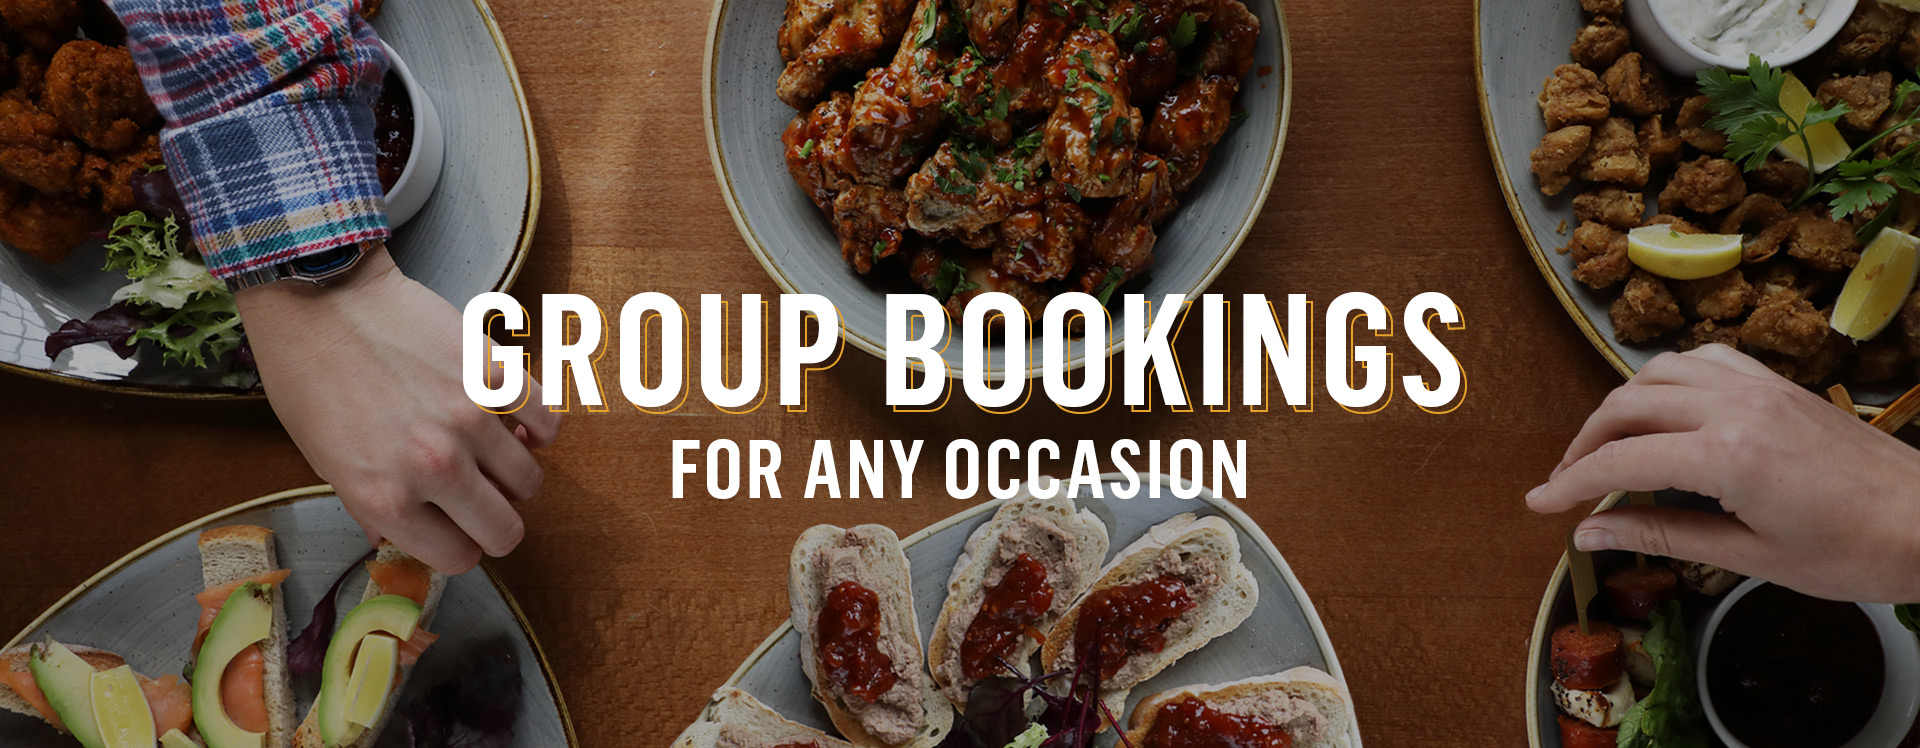 Group Bookings at The Falcon